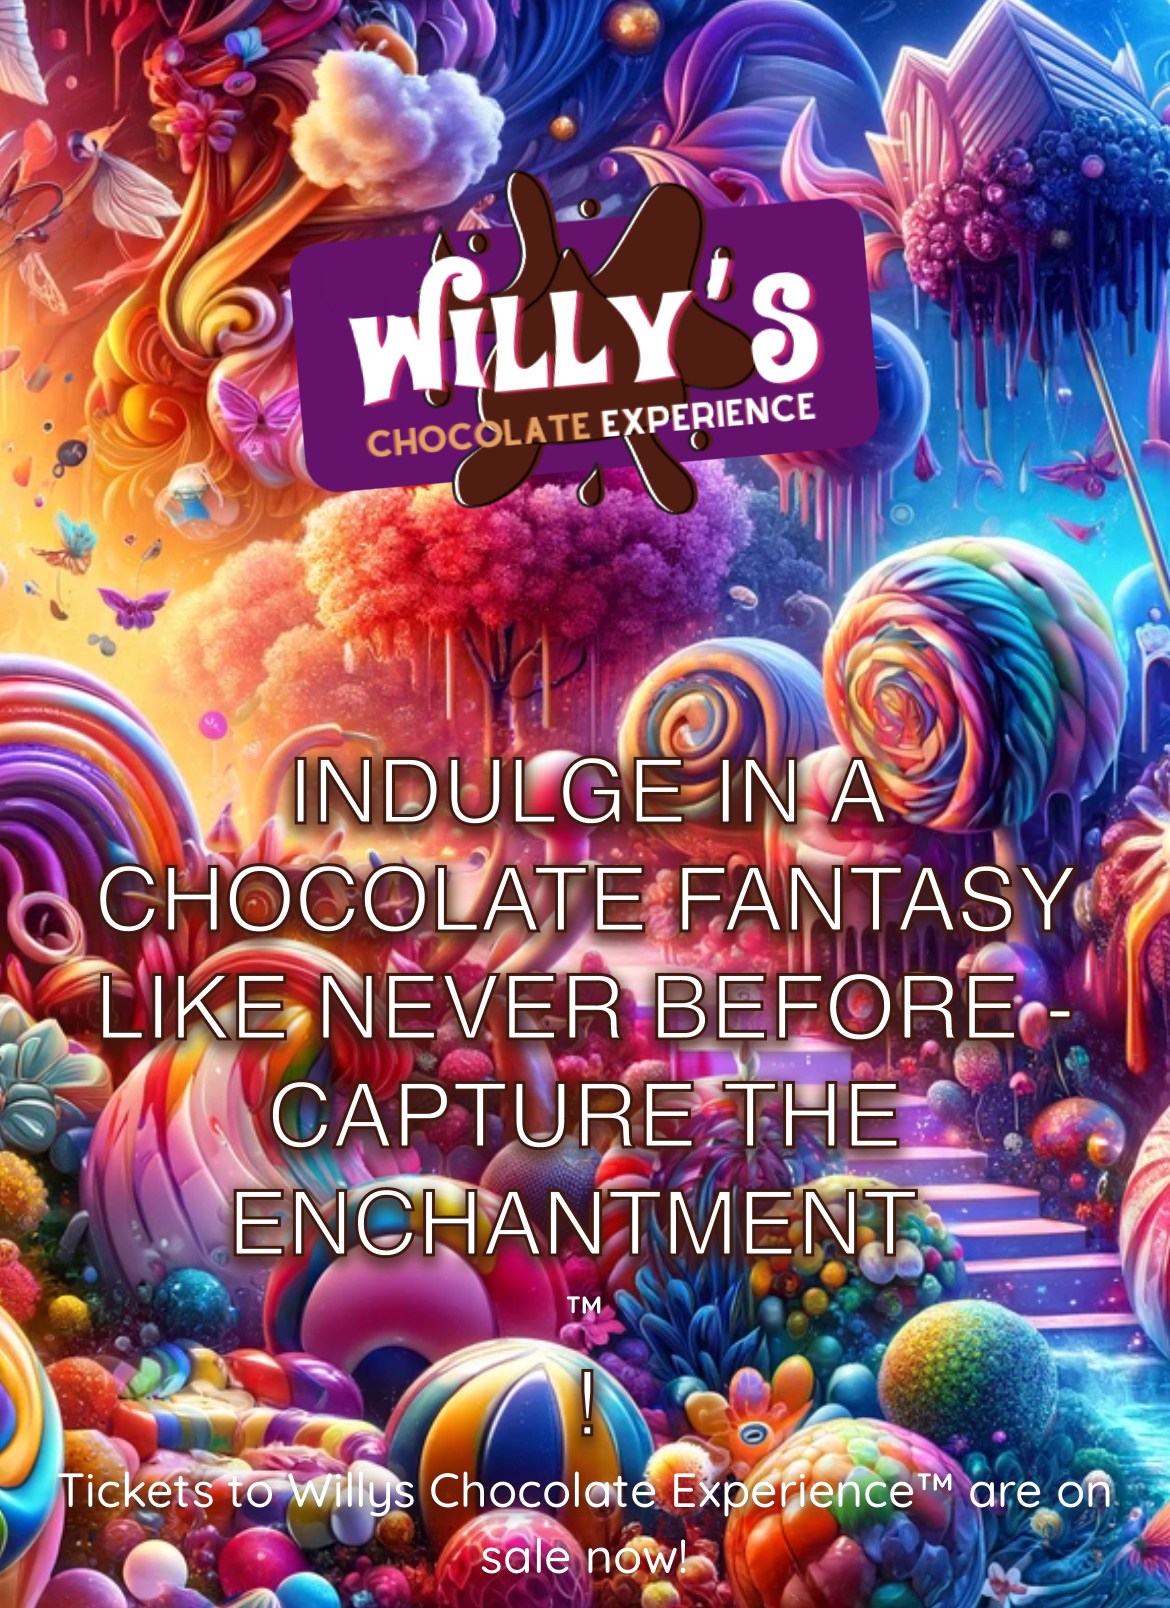 Advert for Willy's Chocolate Experience